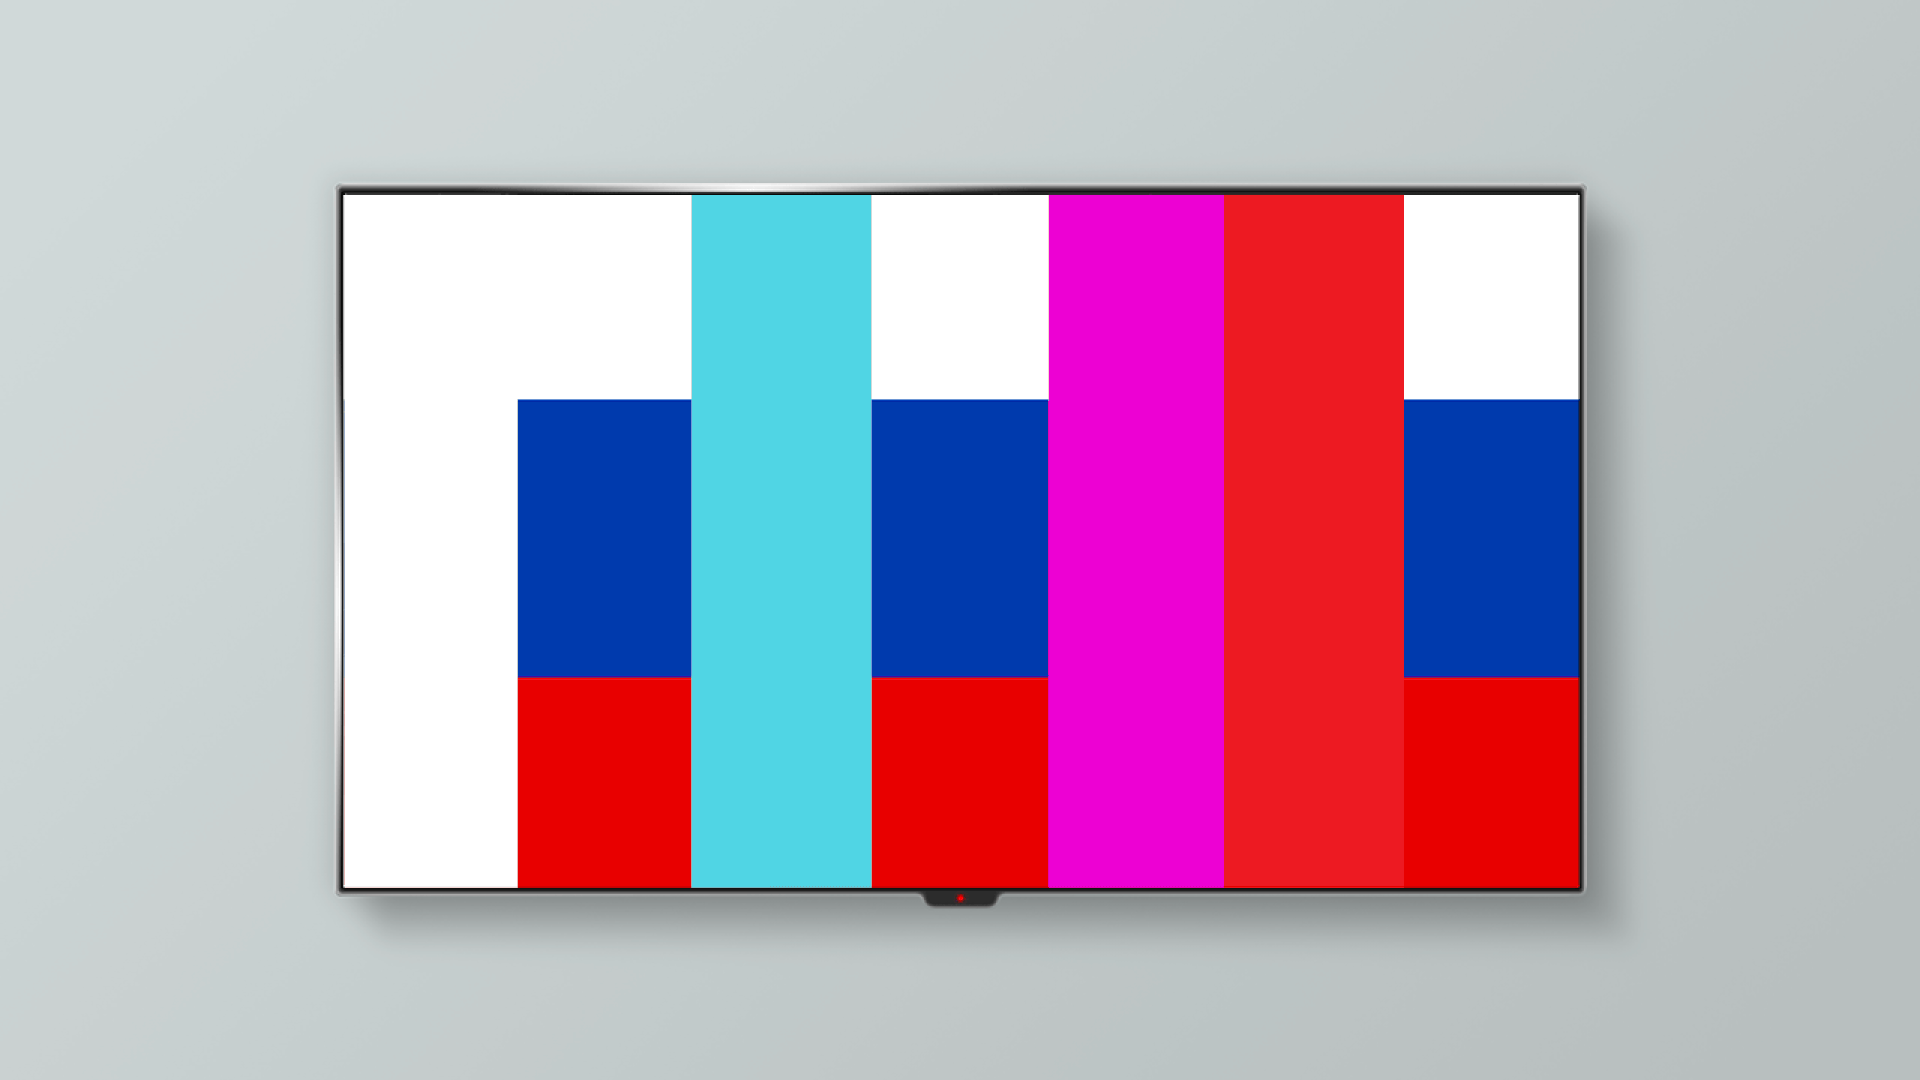 Illustration of a TV flickering between no signal and a Russian flag